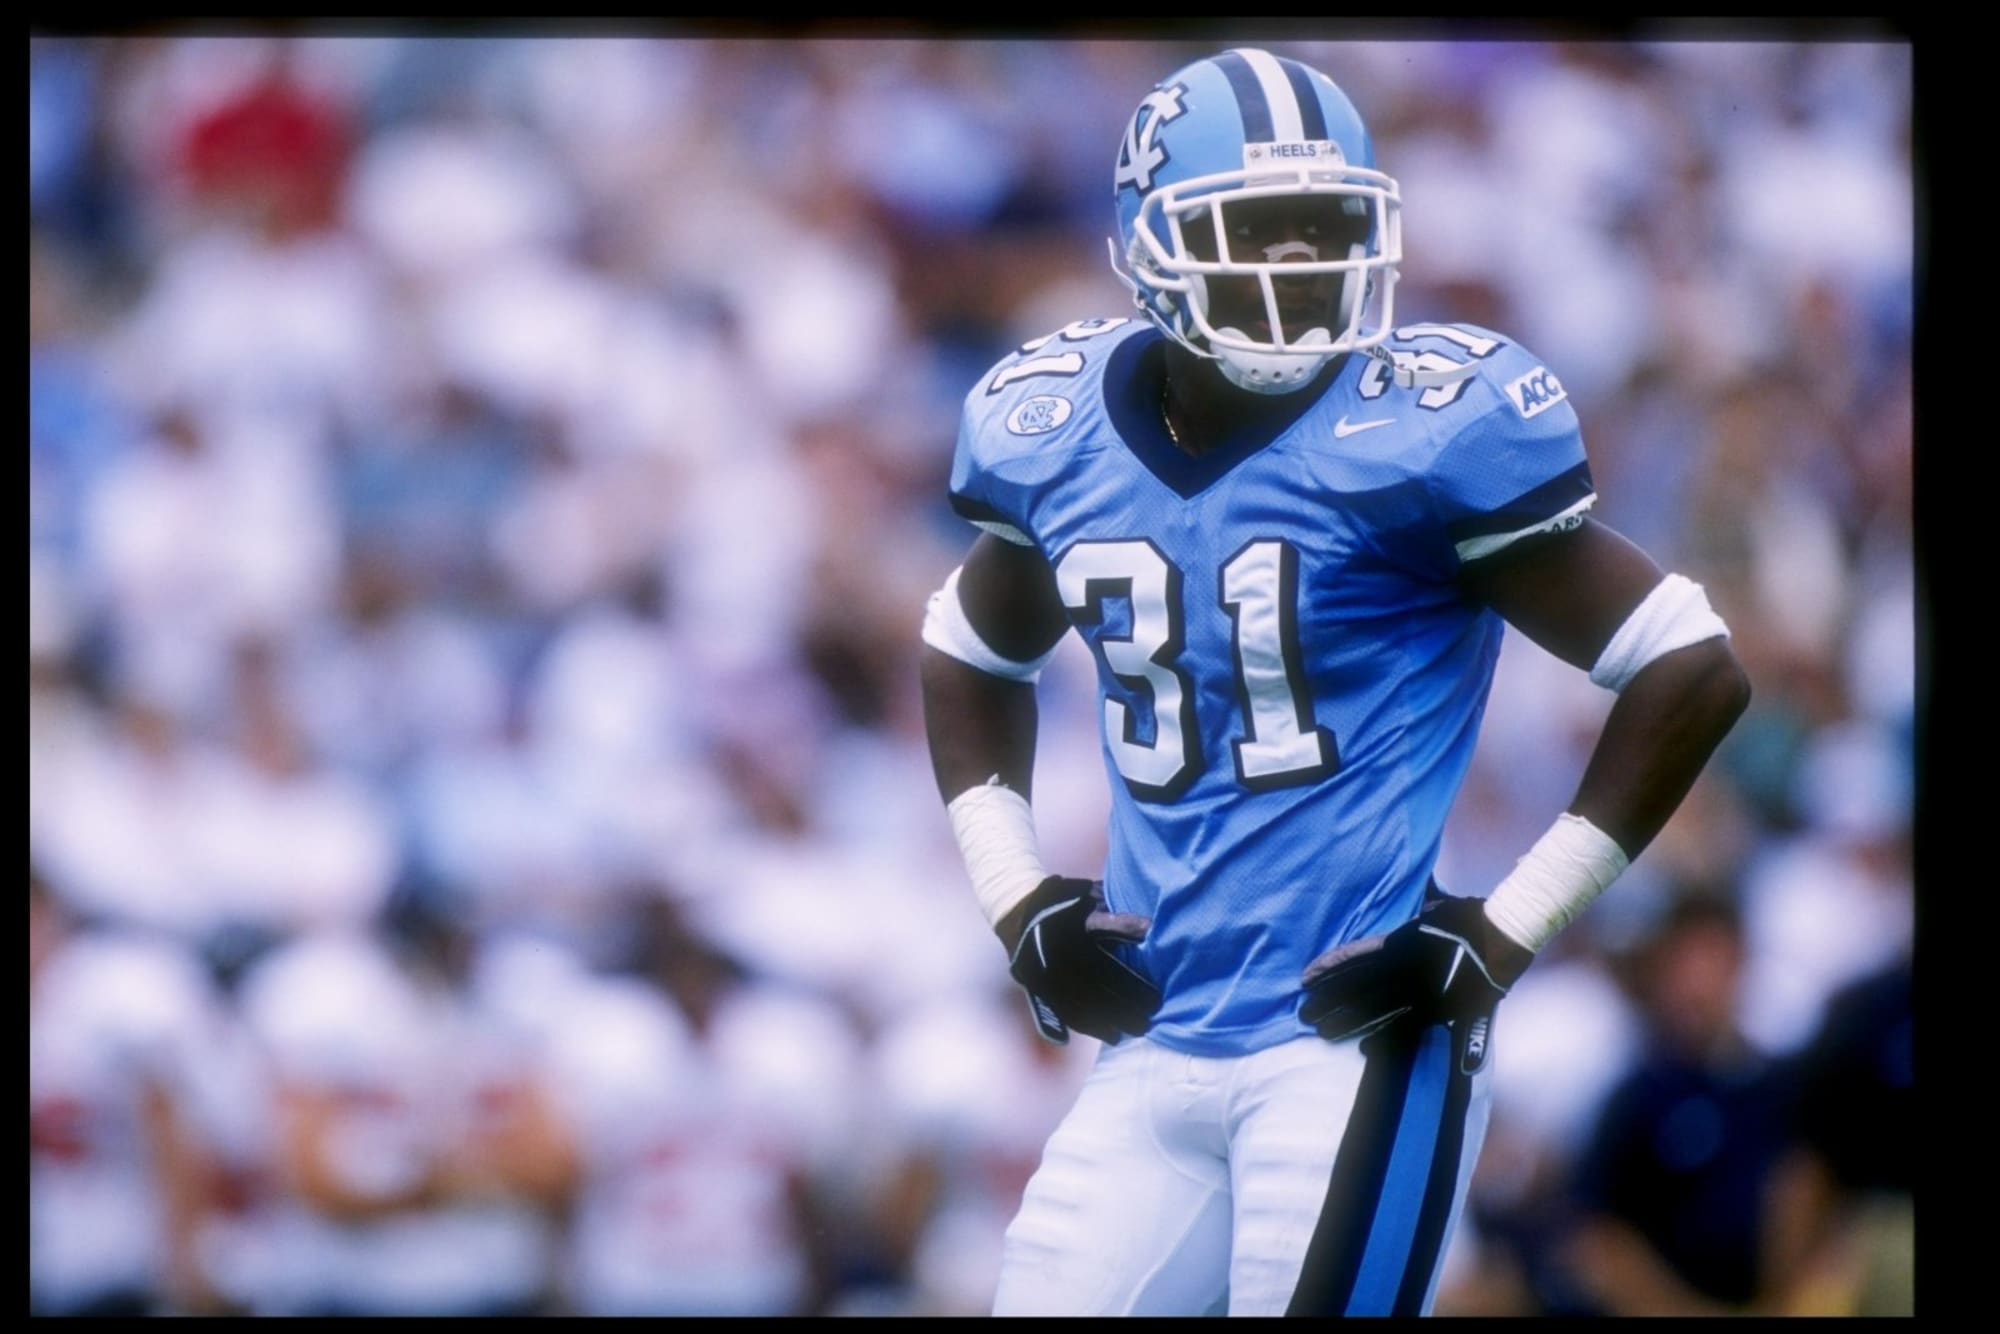 UNC Football to wear 1990s throwback uniforms for Bowl Game vs. South  Carolina - Tar Heel Times - 12/24/2021